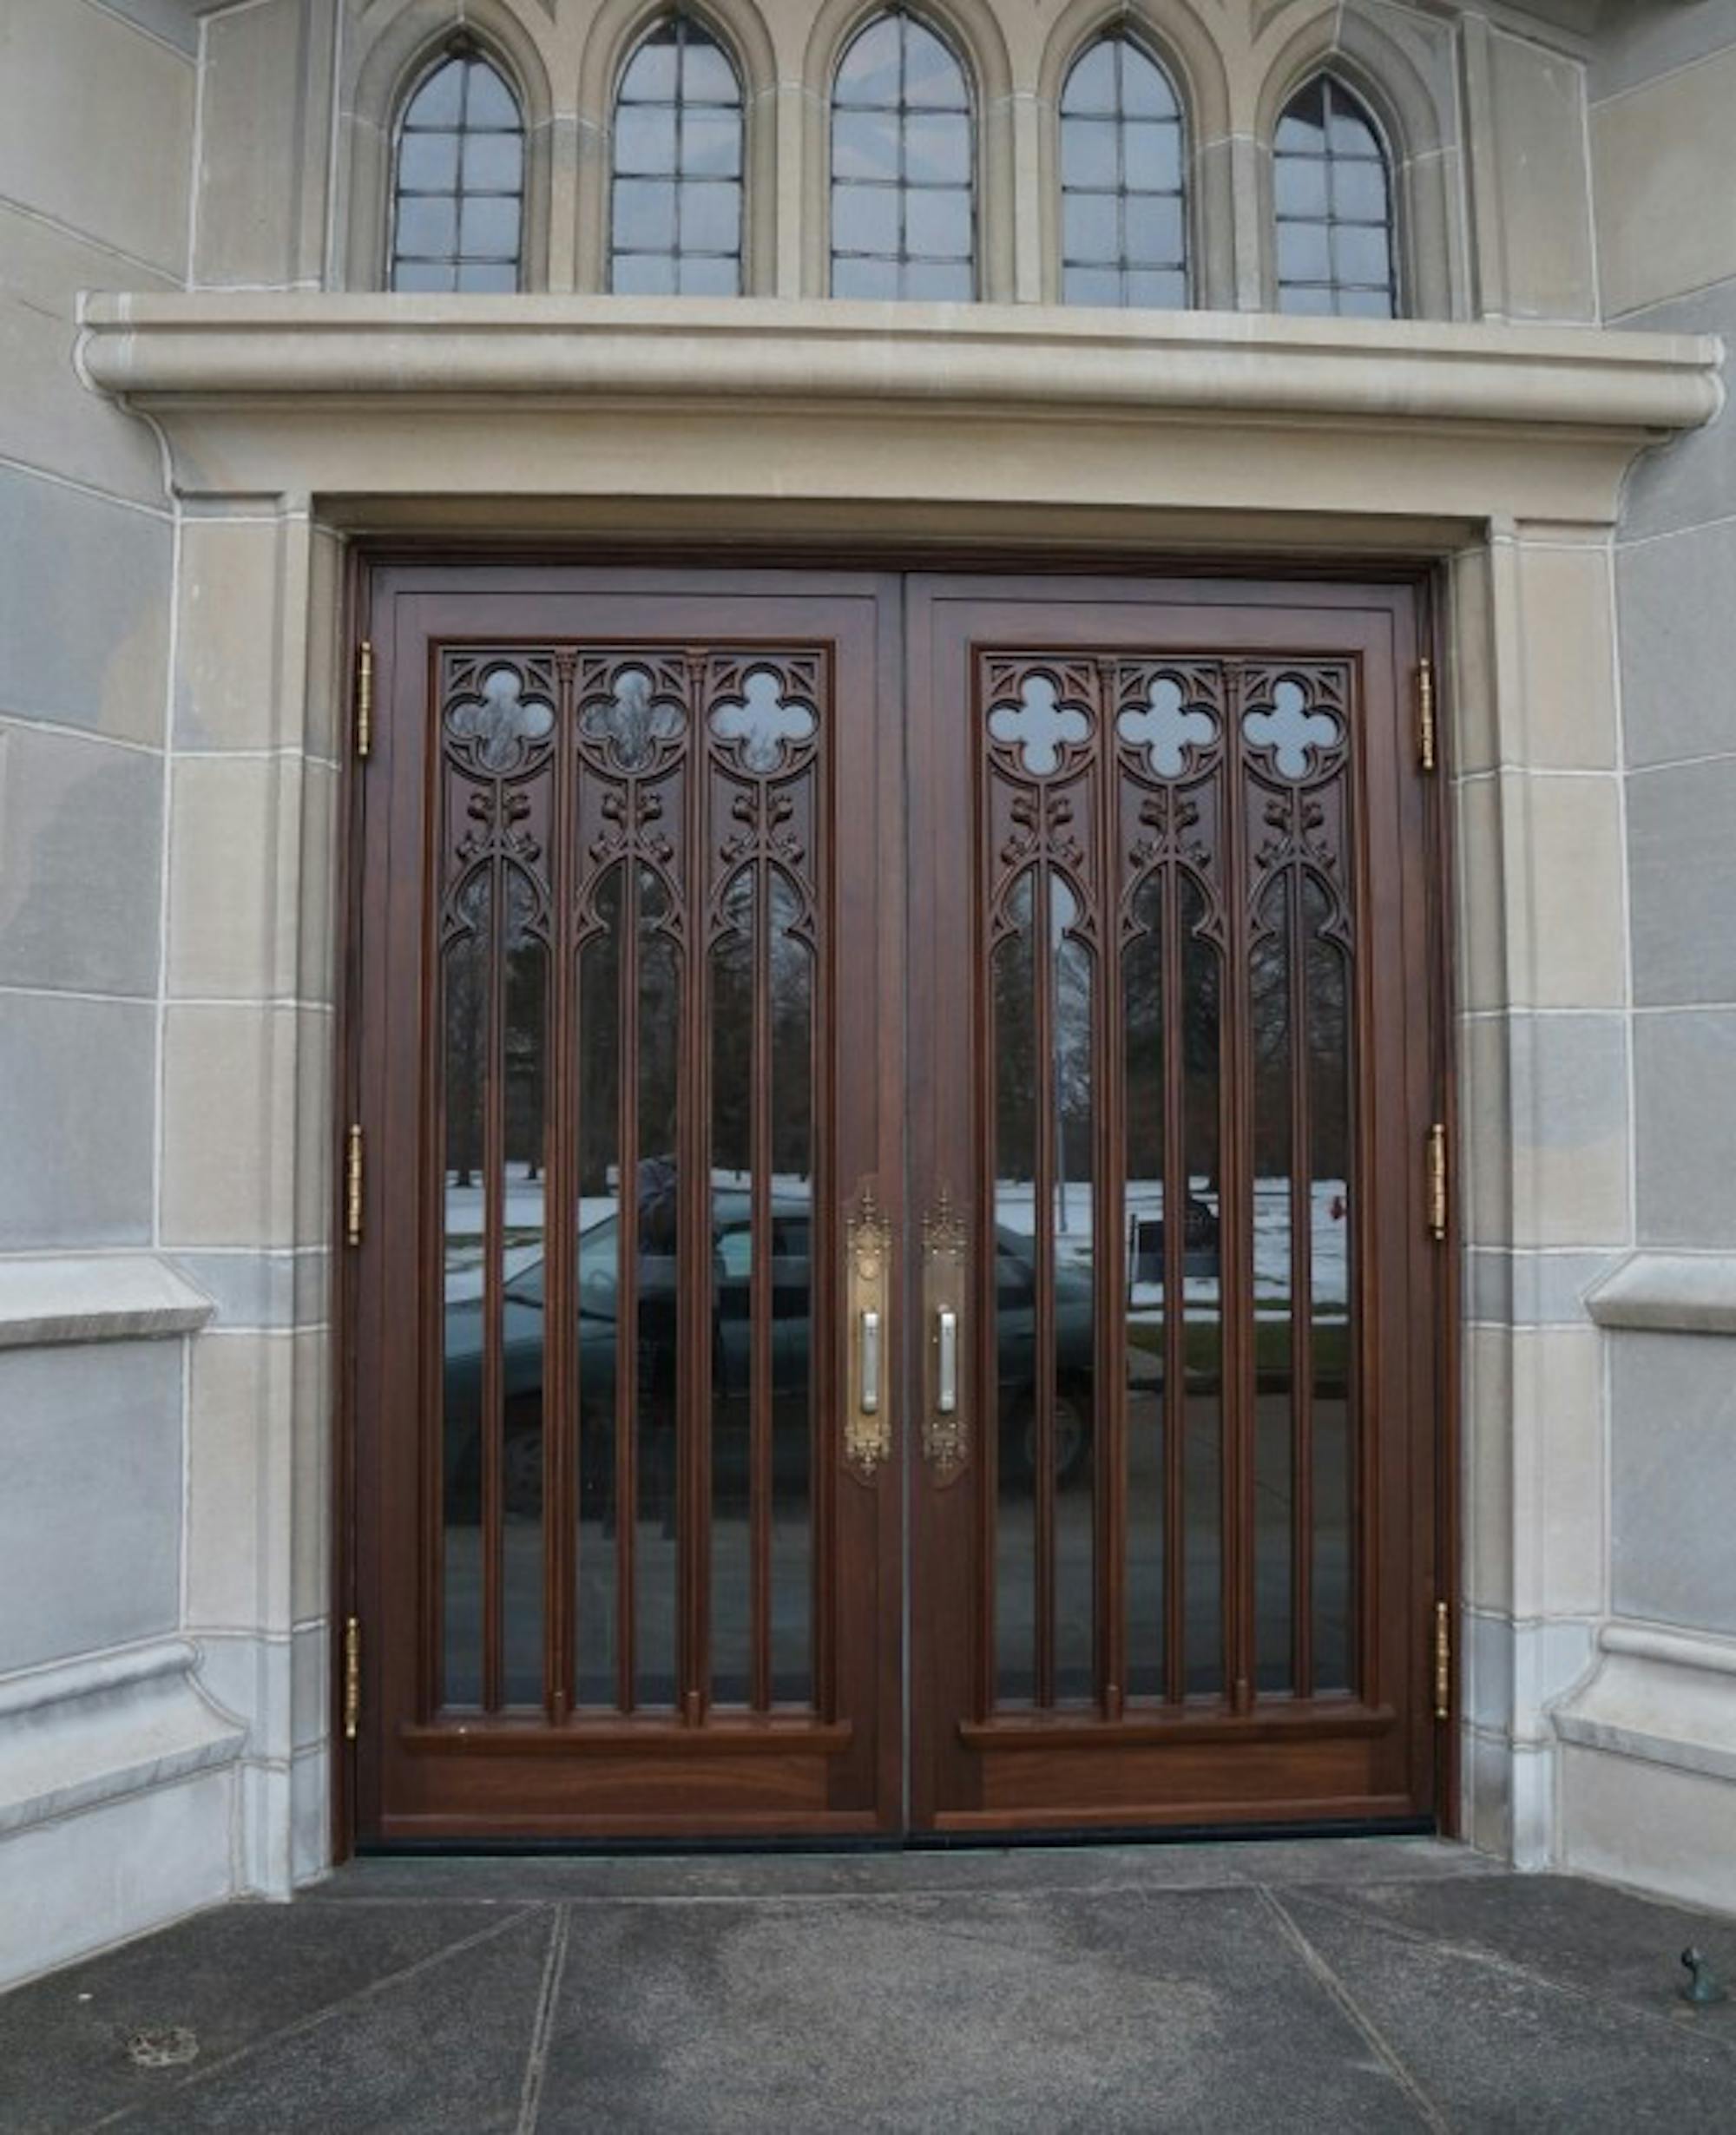 The Le Mans doors, once the entrance to Le Mans Hall at Saint Mary’s, will be repaired and placed in the parlor of Haggar Hall.